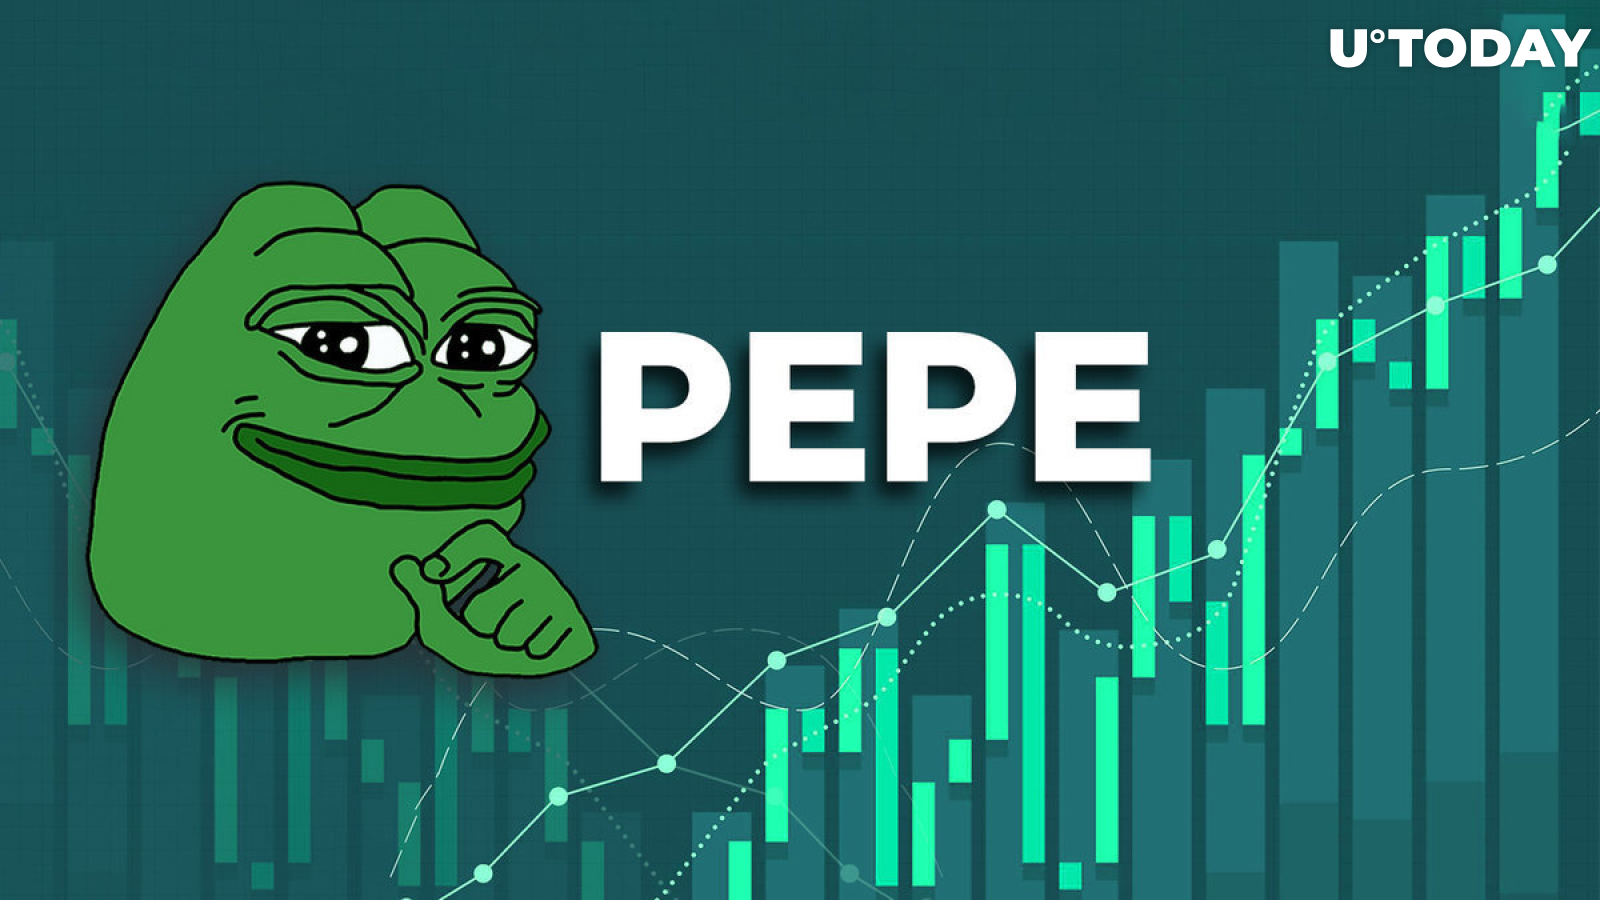 PEPE Sees Dramatic 11% Surge, Analyst Says More Coming